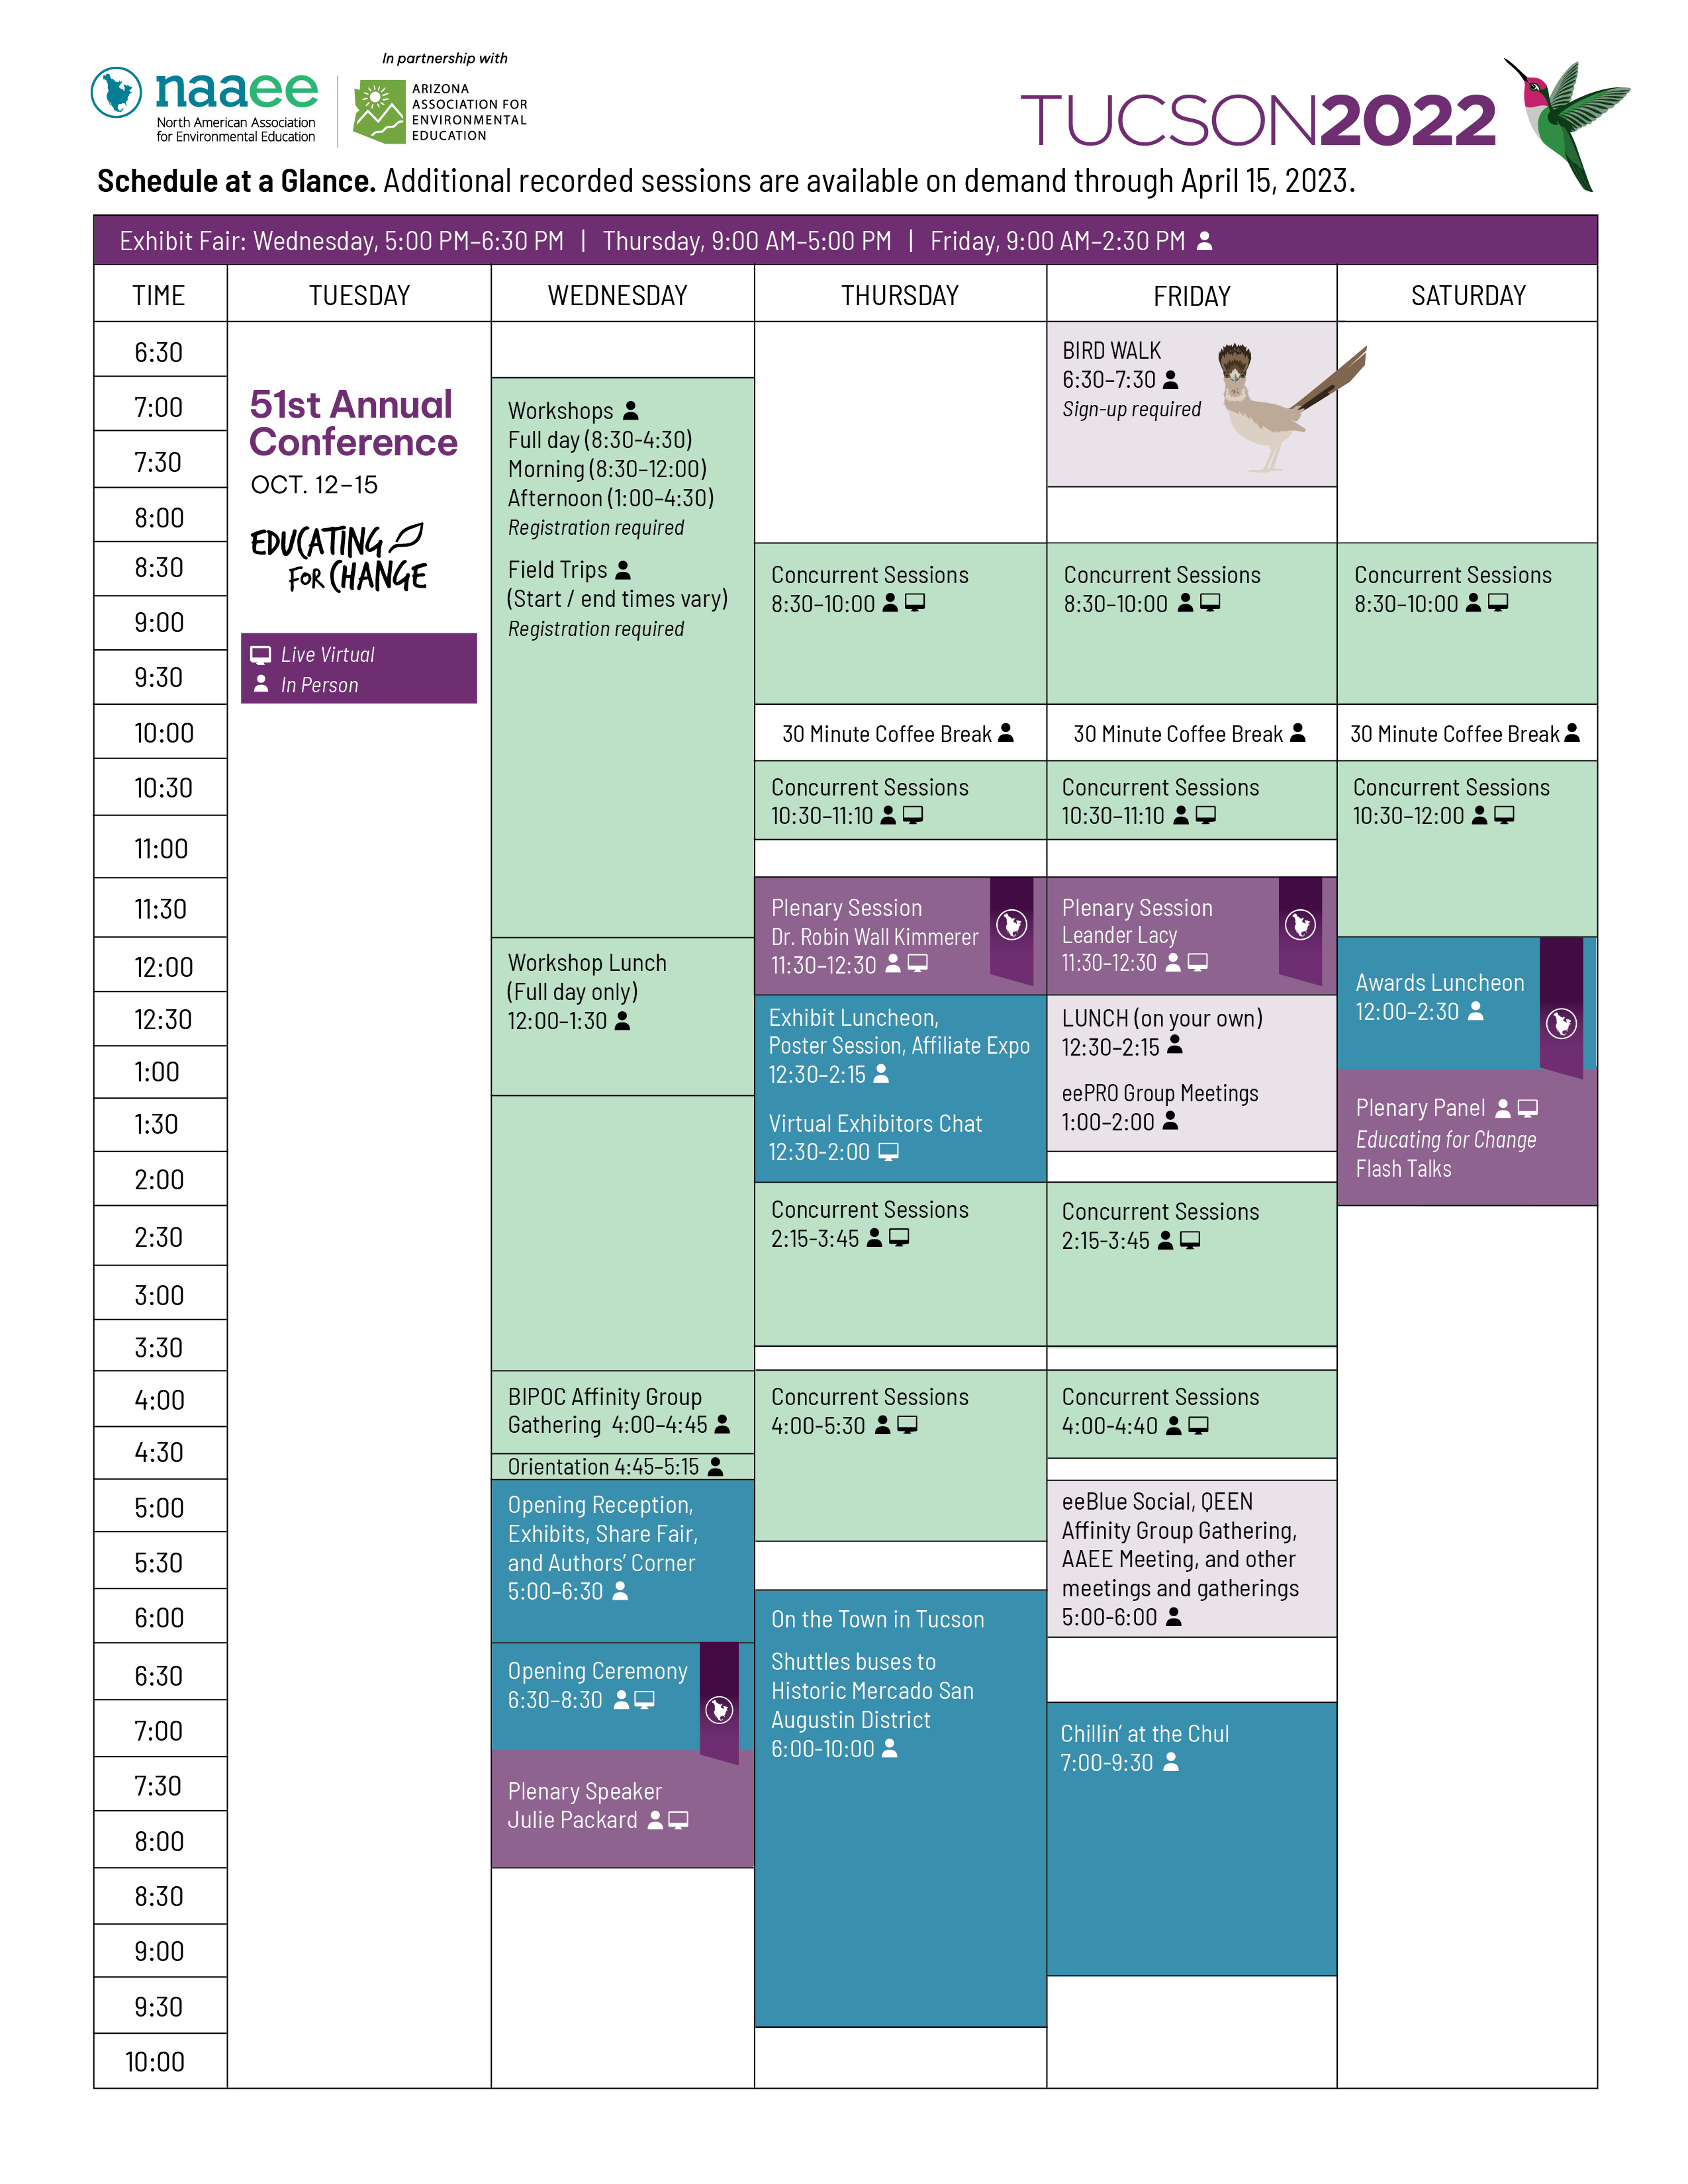 Conf sched at glance 2